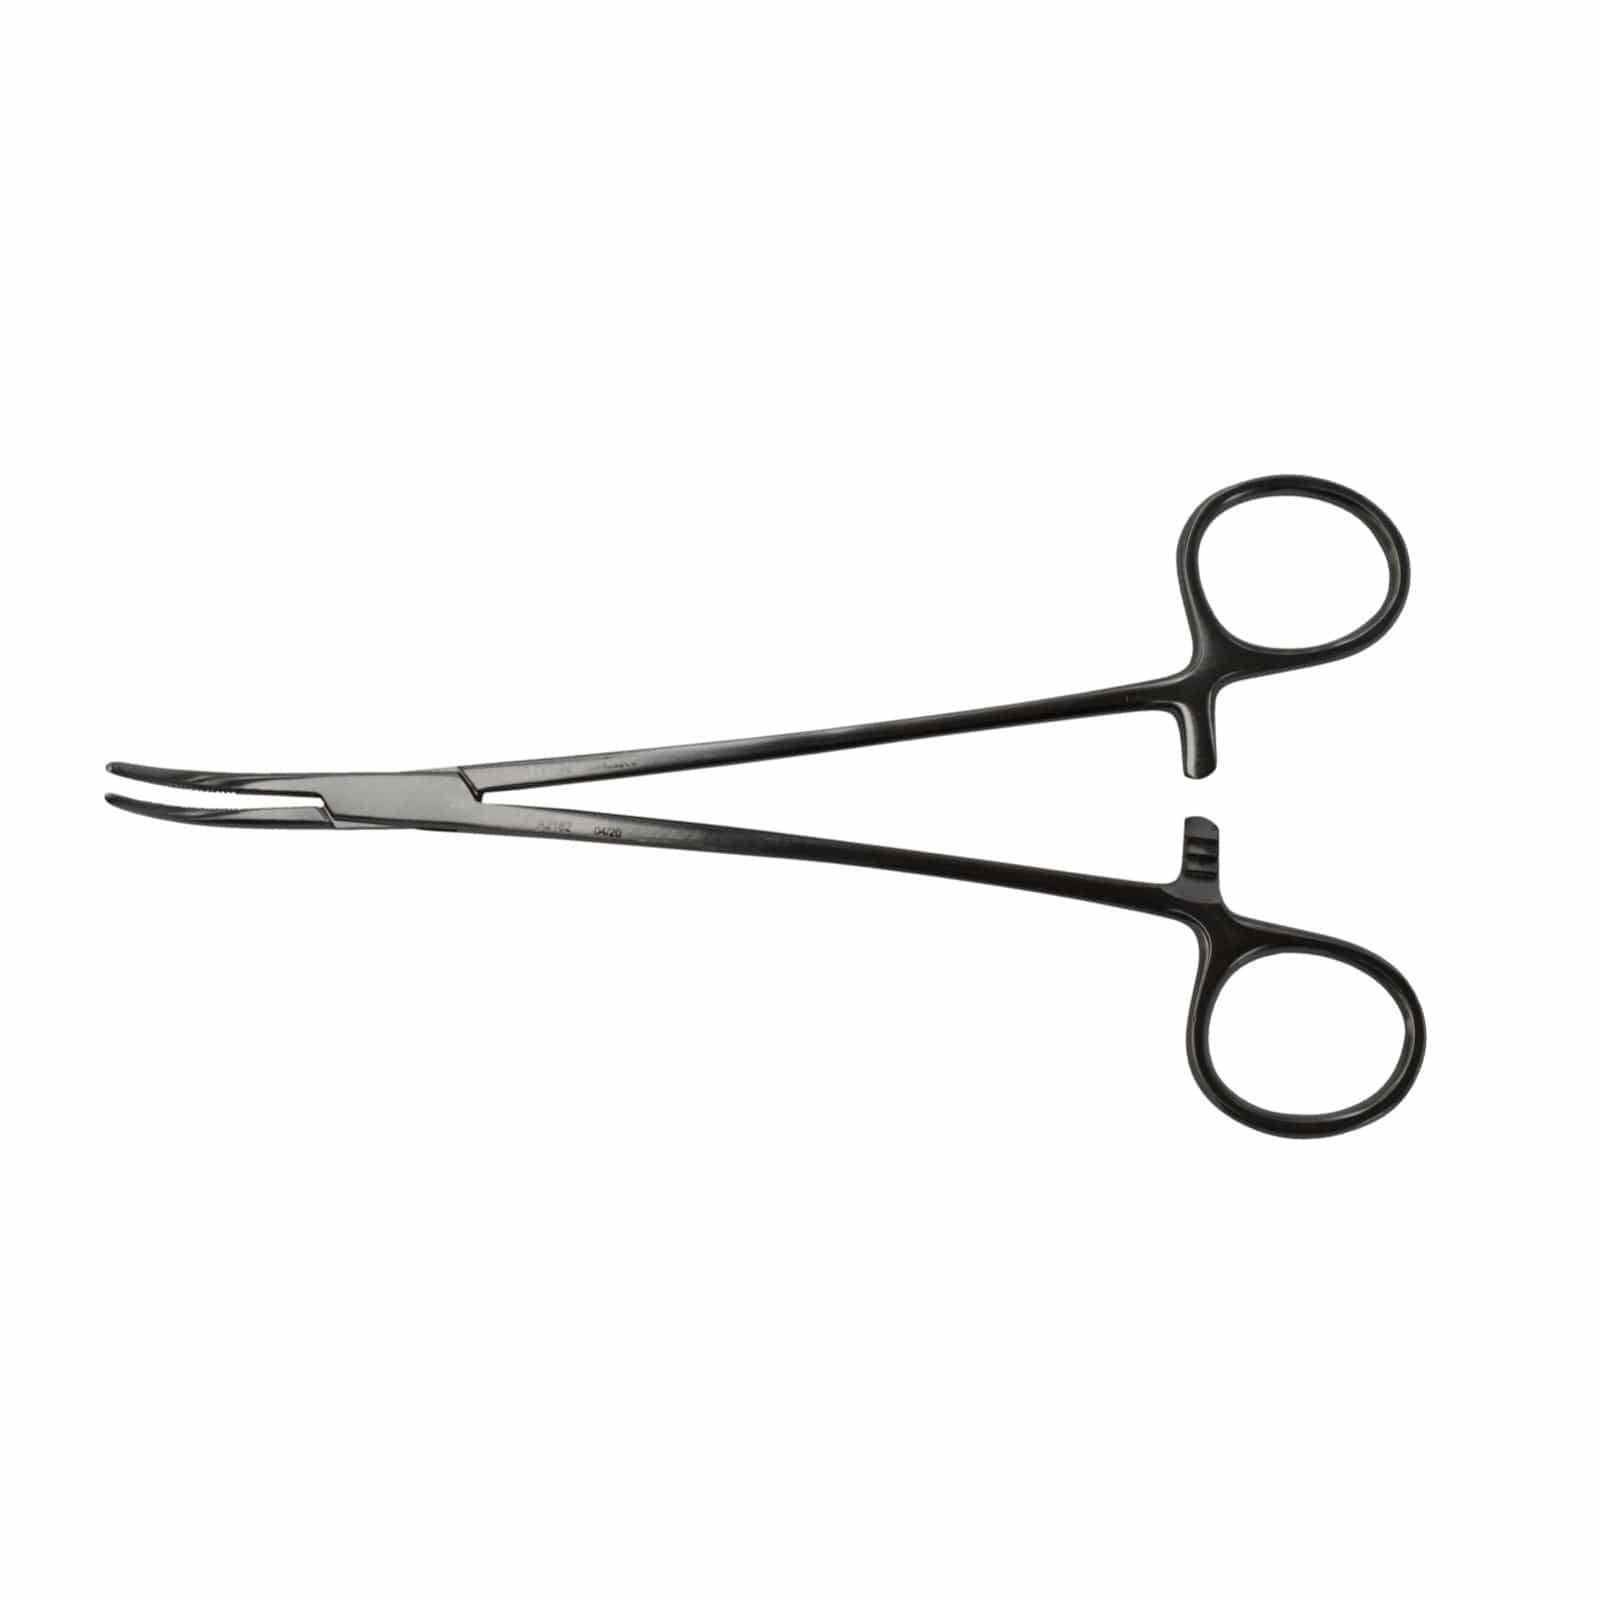 Armo Surgical Instruments 19cm / Curved / (1/2) Armo Sawtell Schmidt Forceps